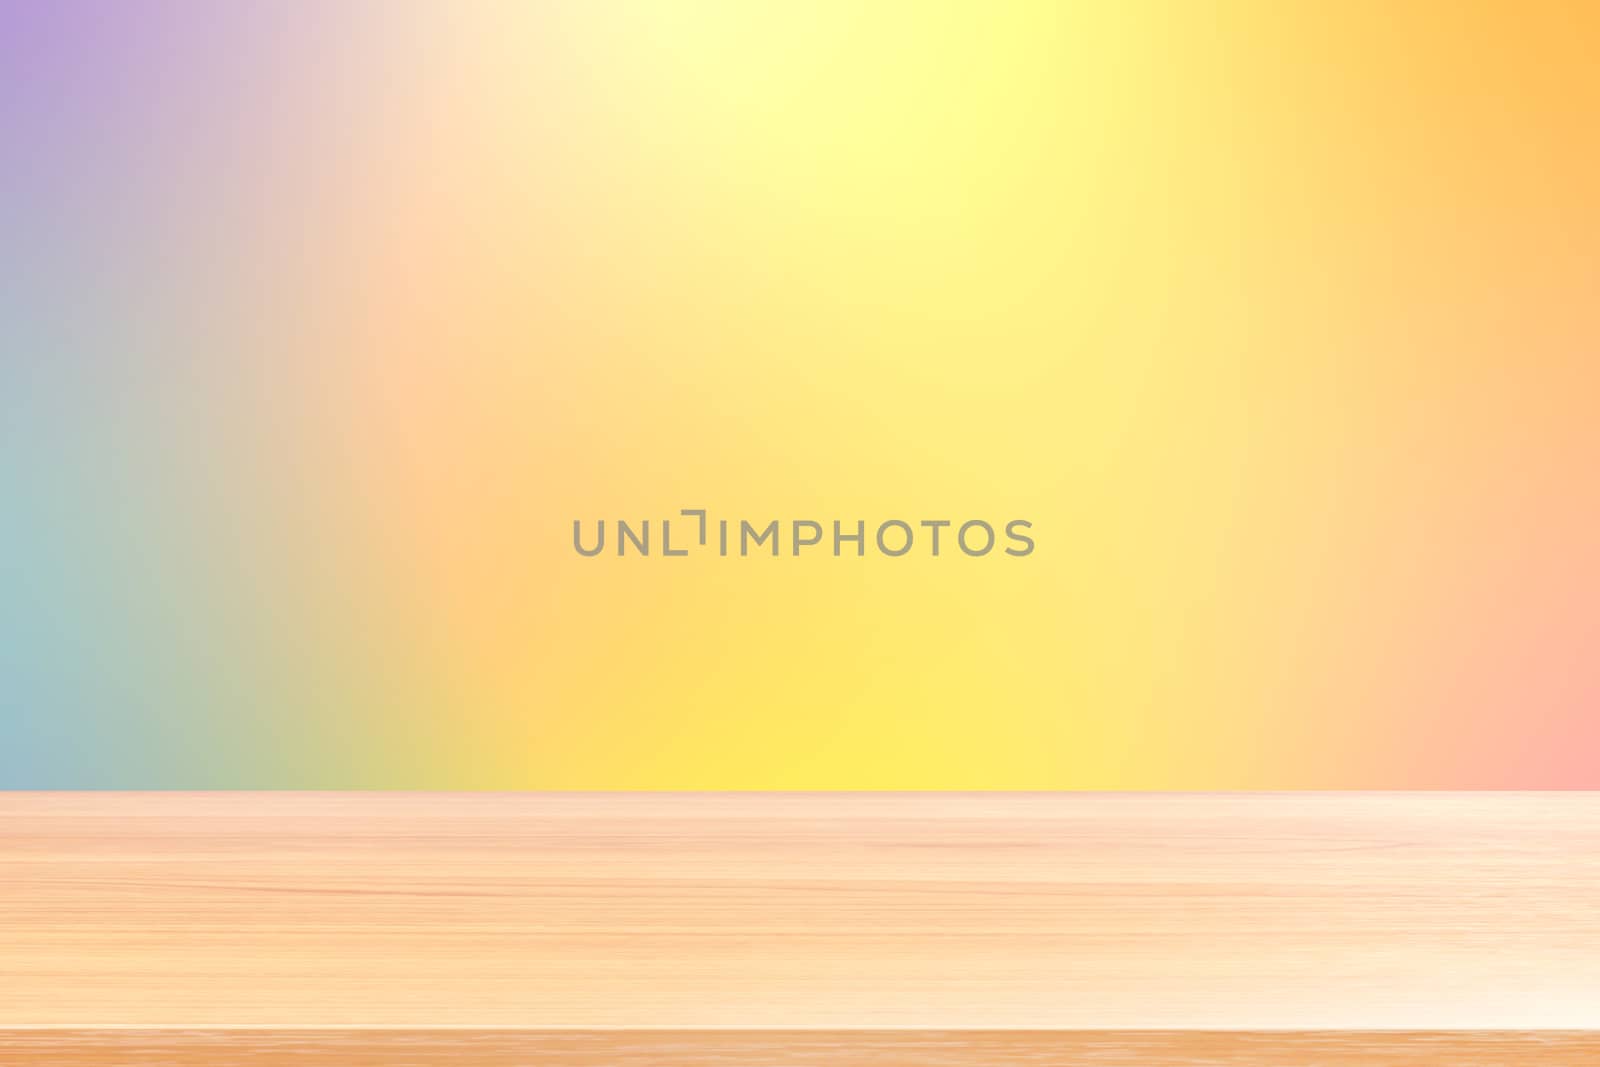 empty wood table floor on gradient yellow orange soft background, wood table board empty front colorful gradient, wooden plank blank on light orange gradient for display products or banner advertising by cgdeaw